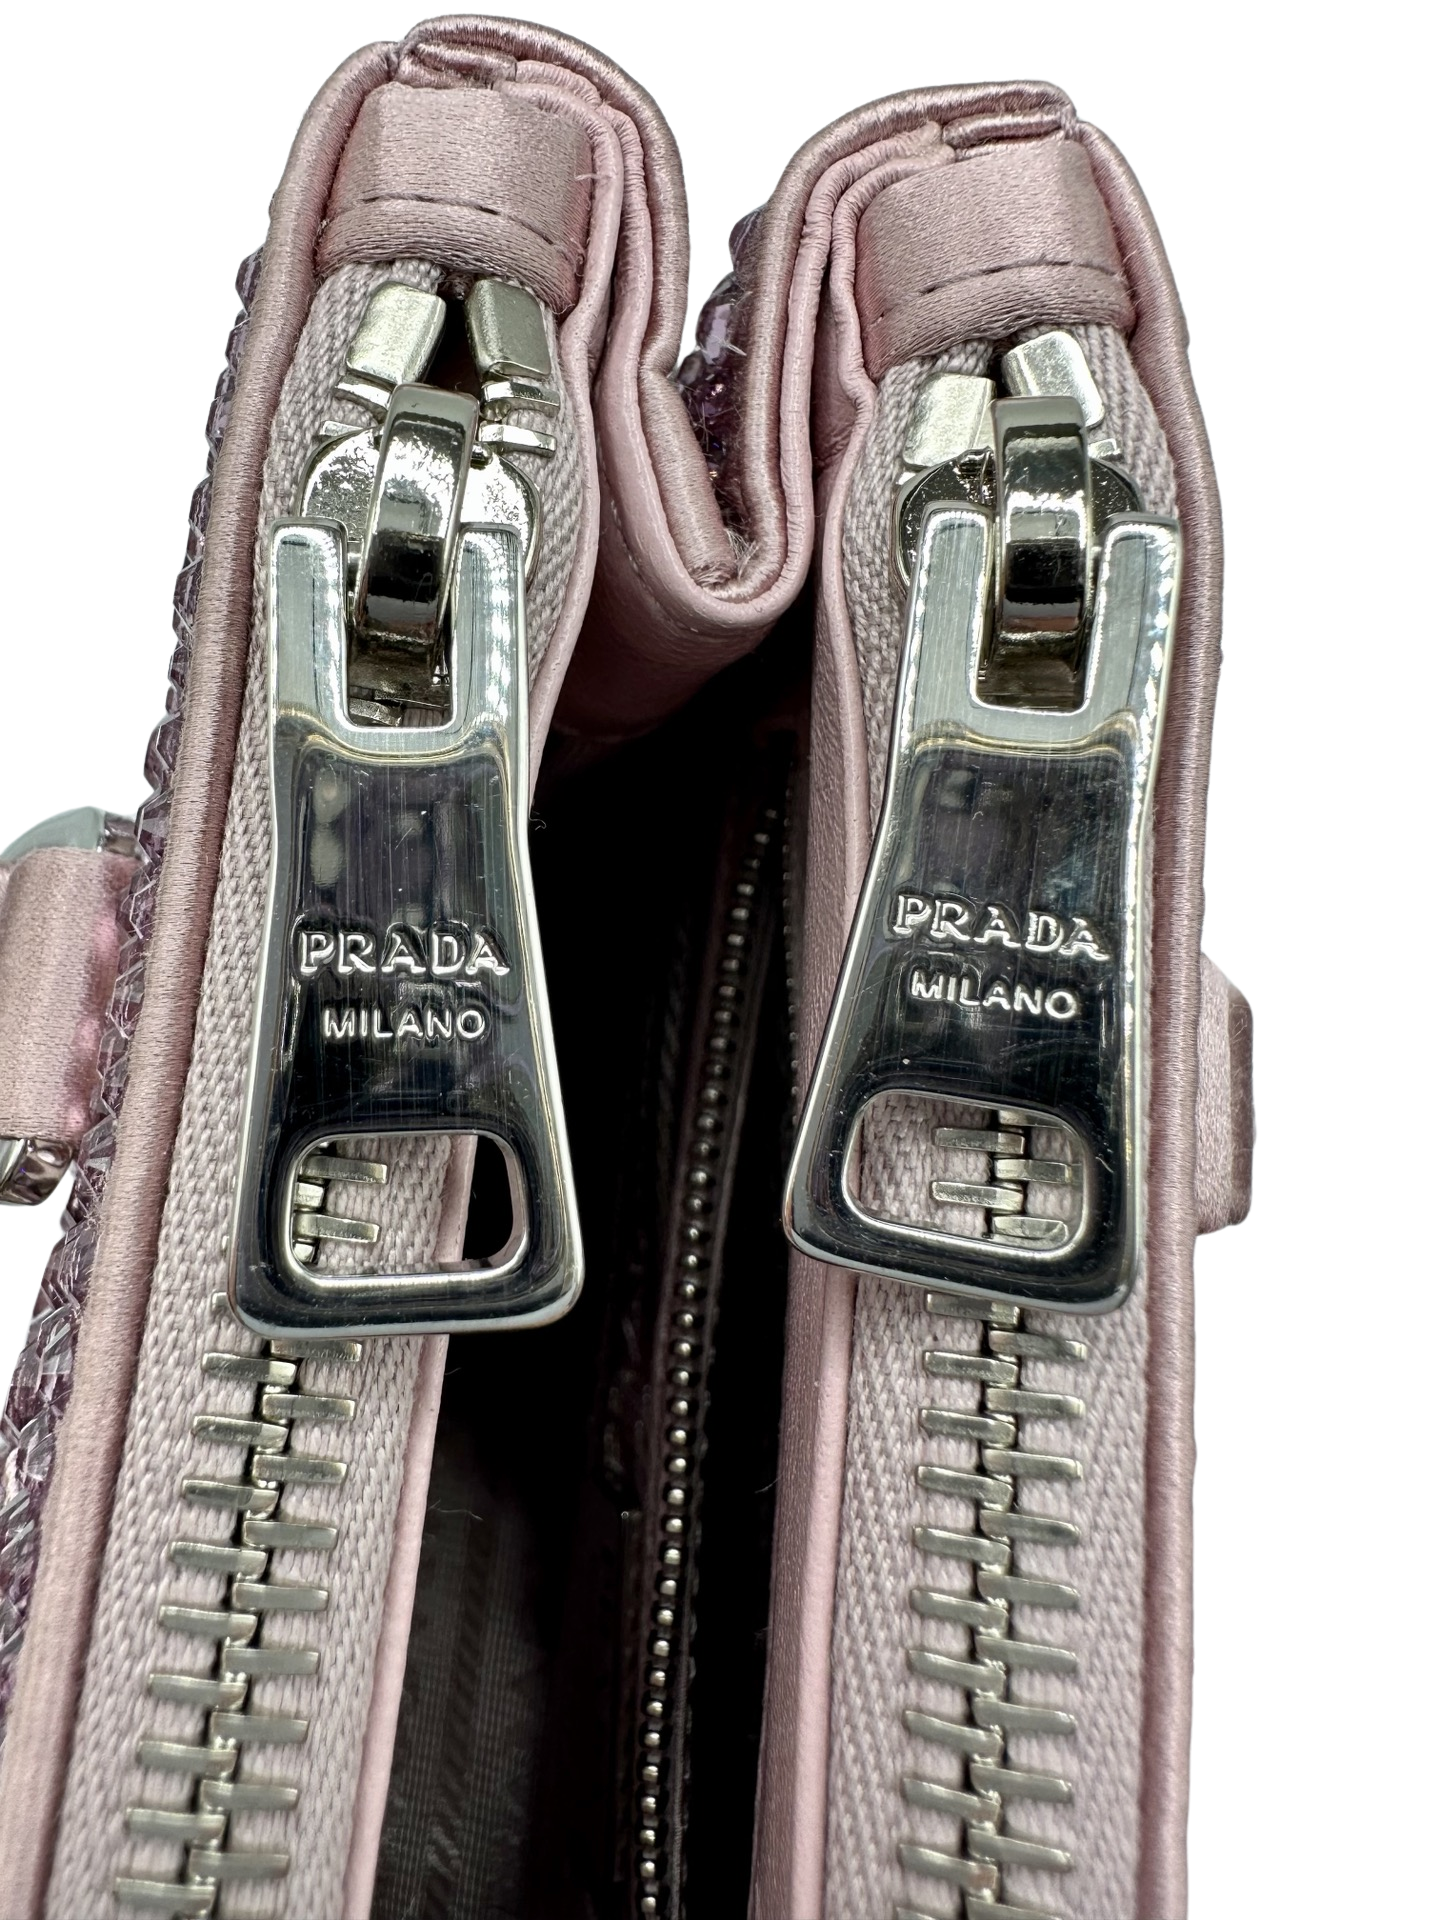 Pictured: Close up of the 2 zippers on the top pockets of the Prada Galleria Crystal mini satin bag in pink. There are very small scratches on the zippers. They say Prada Milano on them.